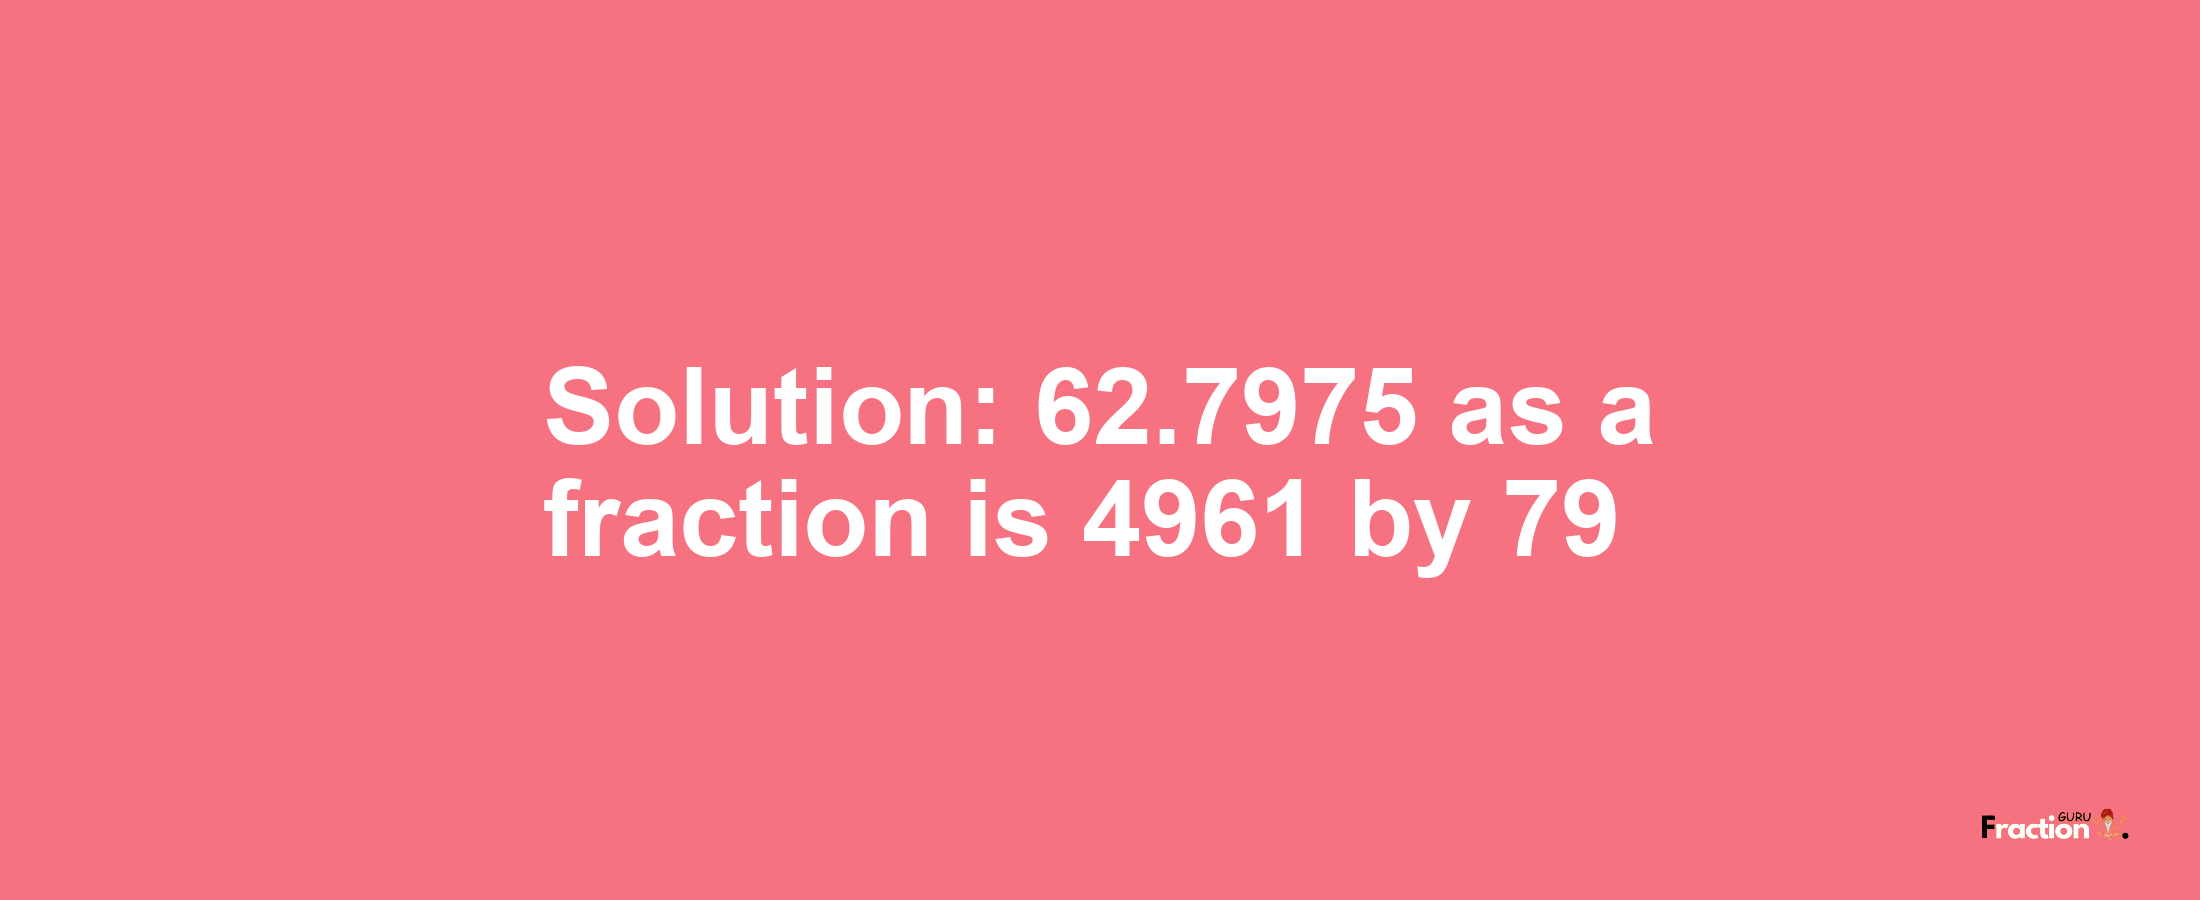 Solution:62.7975 as a fraction is 4961/79